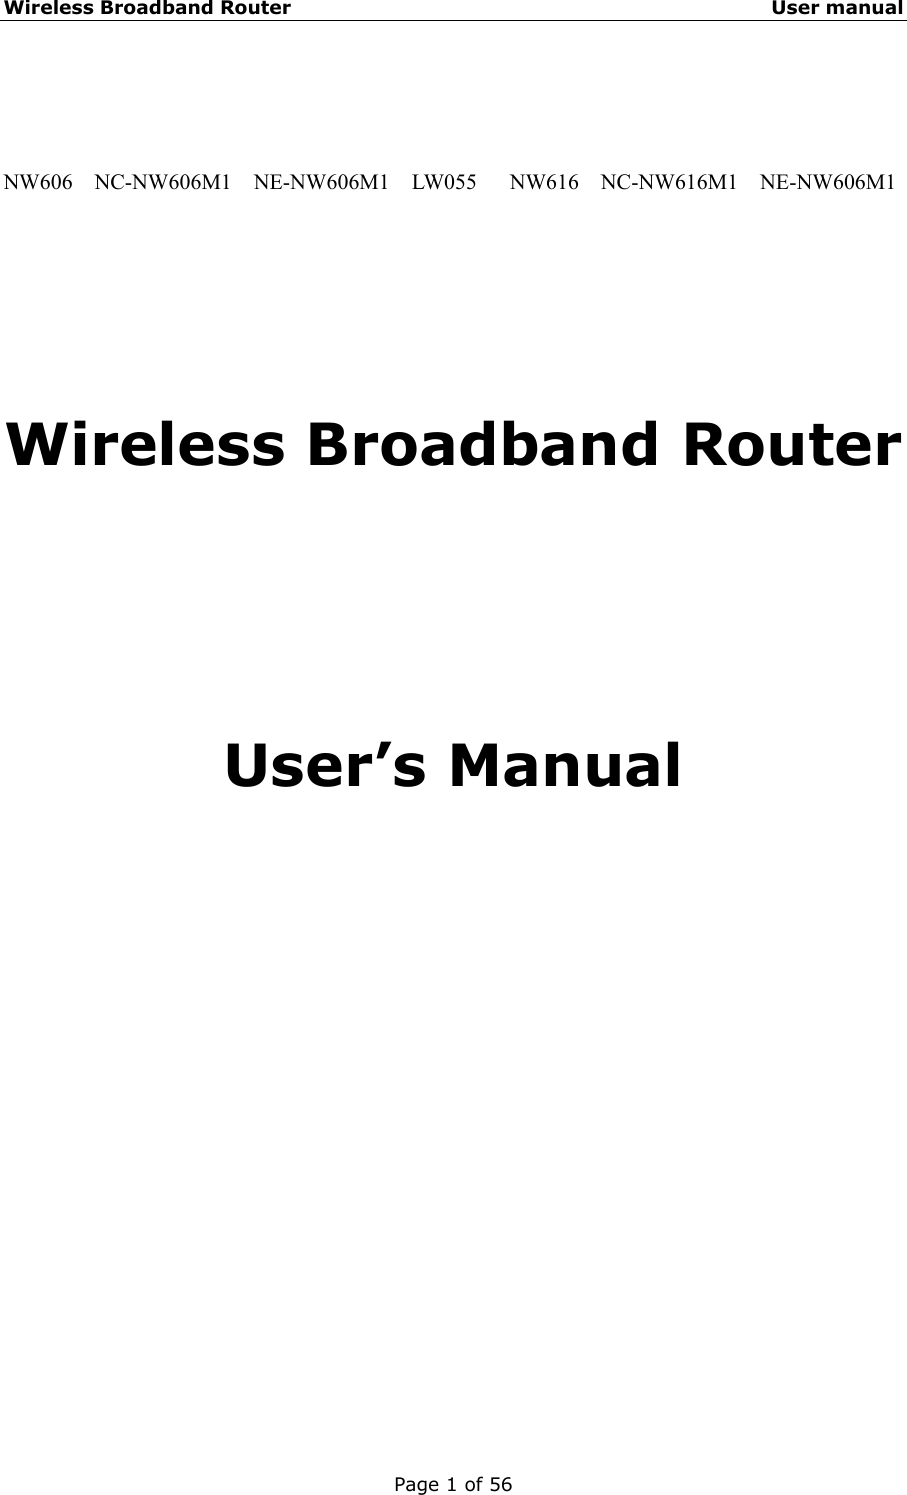 Wireless Broadband Router                                                   User manual Page 1 of 56   NW606  NC-NW606M1  NE-NW606M1  LW055   NW616  NC-NW616M1  NE-NW606M1    Wireless Broadband Router     User’s Manual               